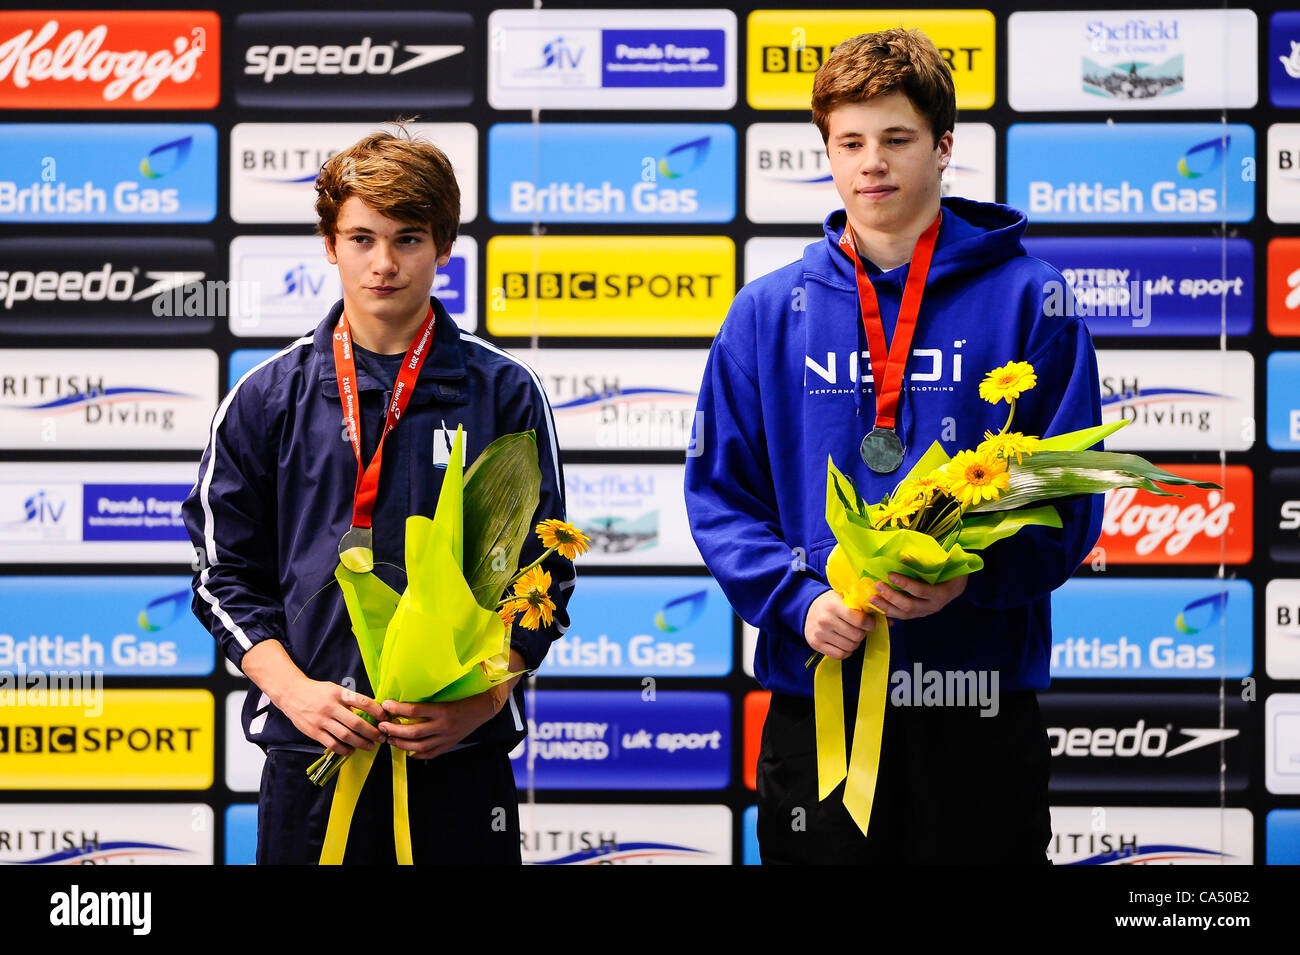 08.06.2012 Sheffield, England. Freddie Woodward and Daniel Goodfellow (City of Sheffield DC and Cambridge Dive Team) collect their silver medals after finishing second in the Mens 3m Synchro Springboard Final on Day 1 of the 2012 British Gas Diving Championships (and Team GB Olympic Squad Selection  Stock Photo